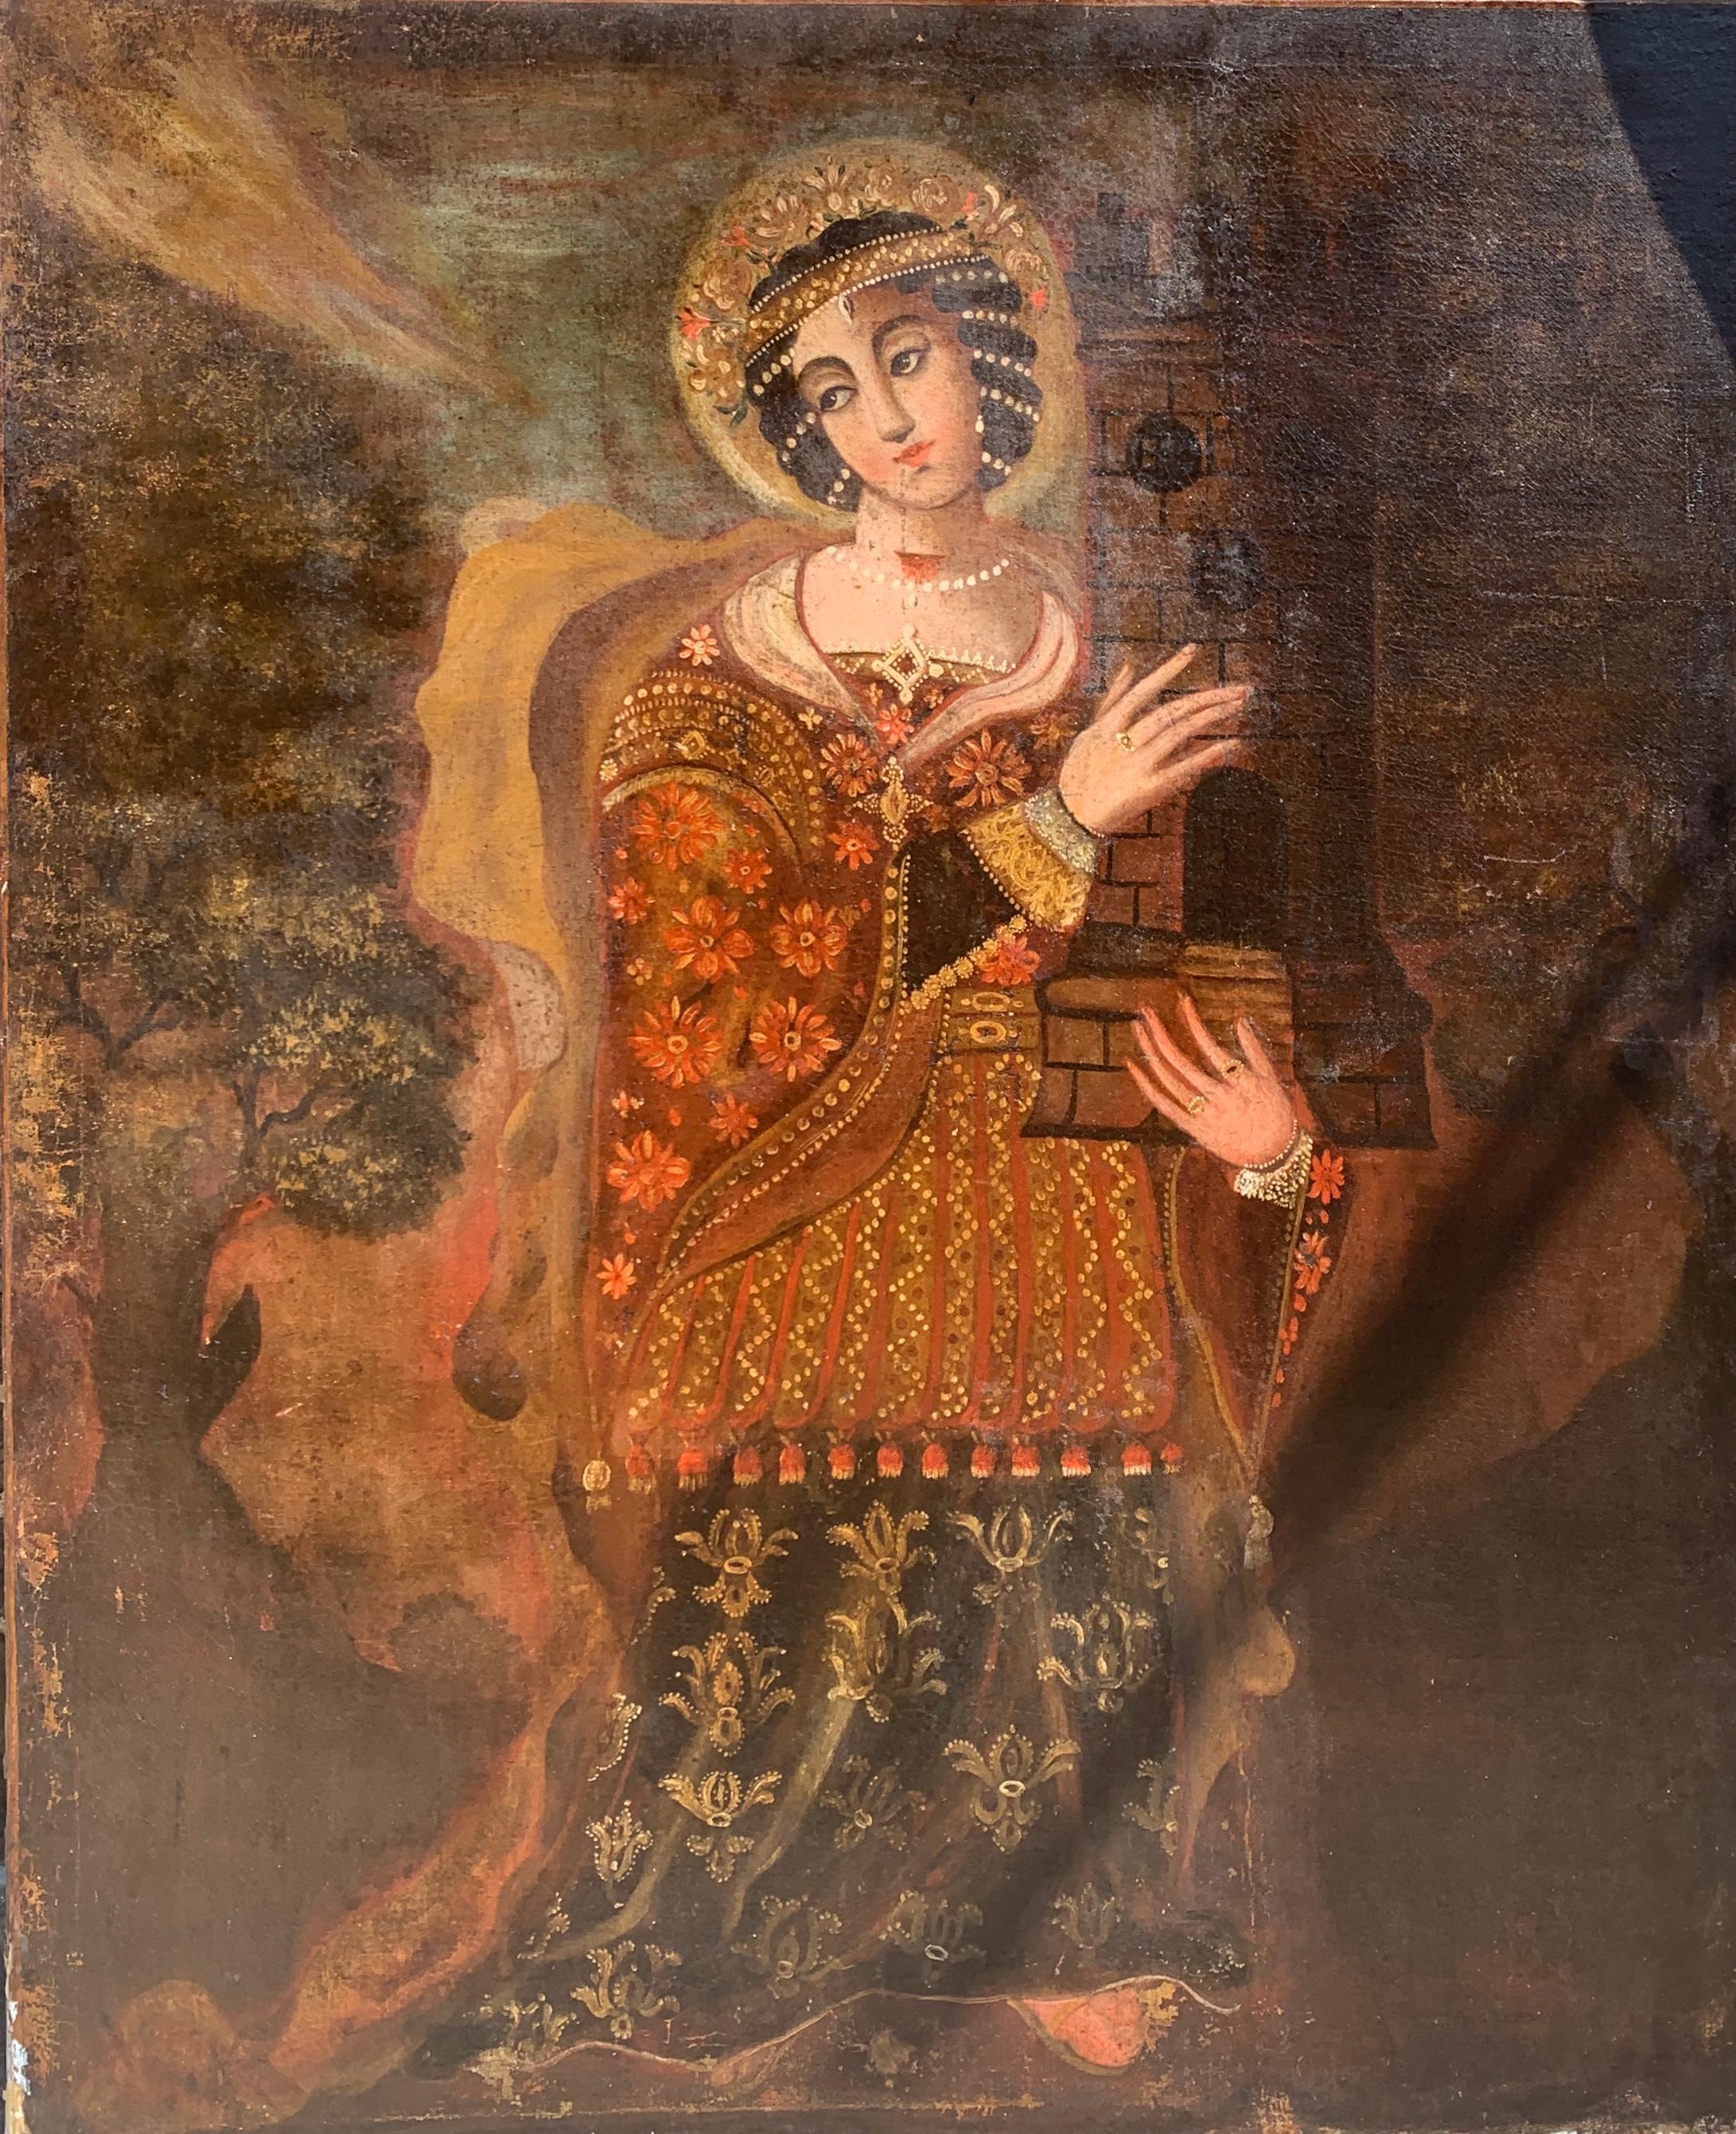 Unknown Portrait Painting - Large 18th Century Spanish Colonial (Cuzco) Oil Painting of Saint Barbara